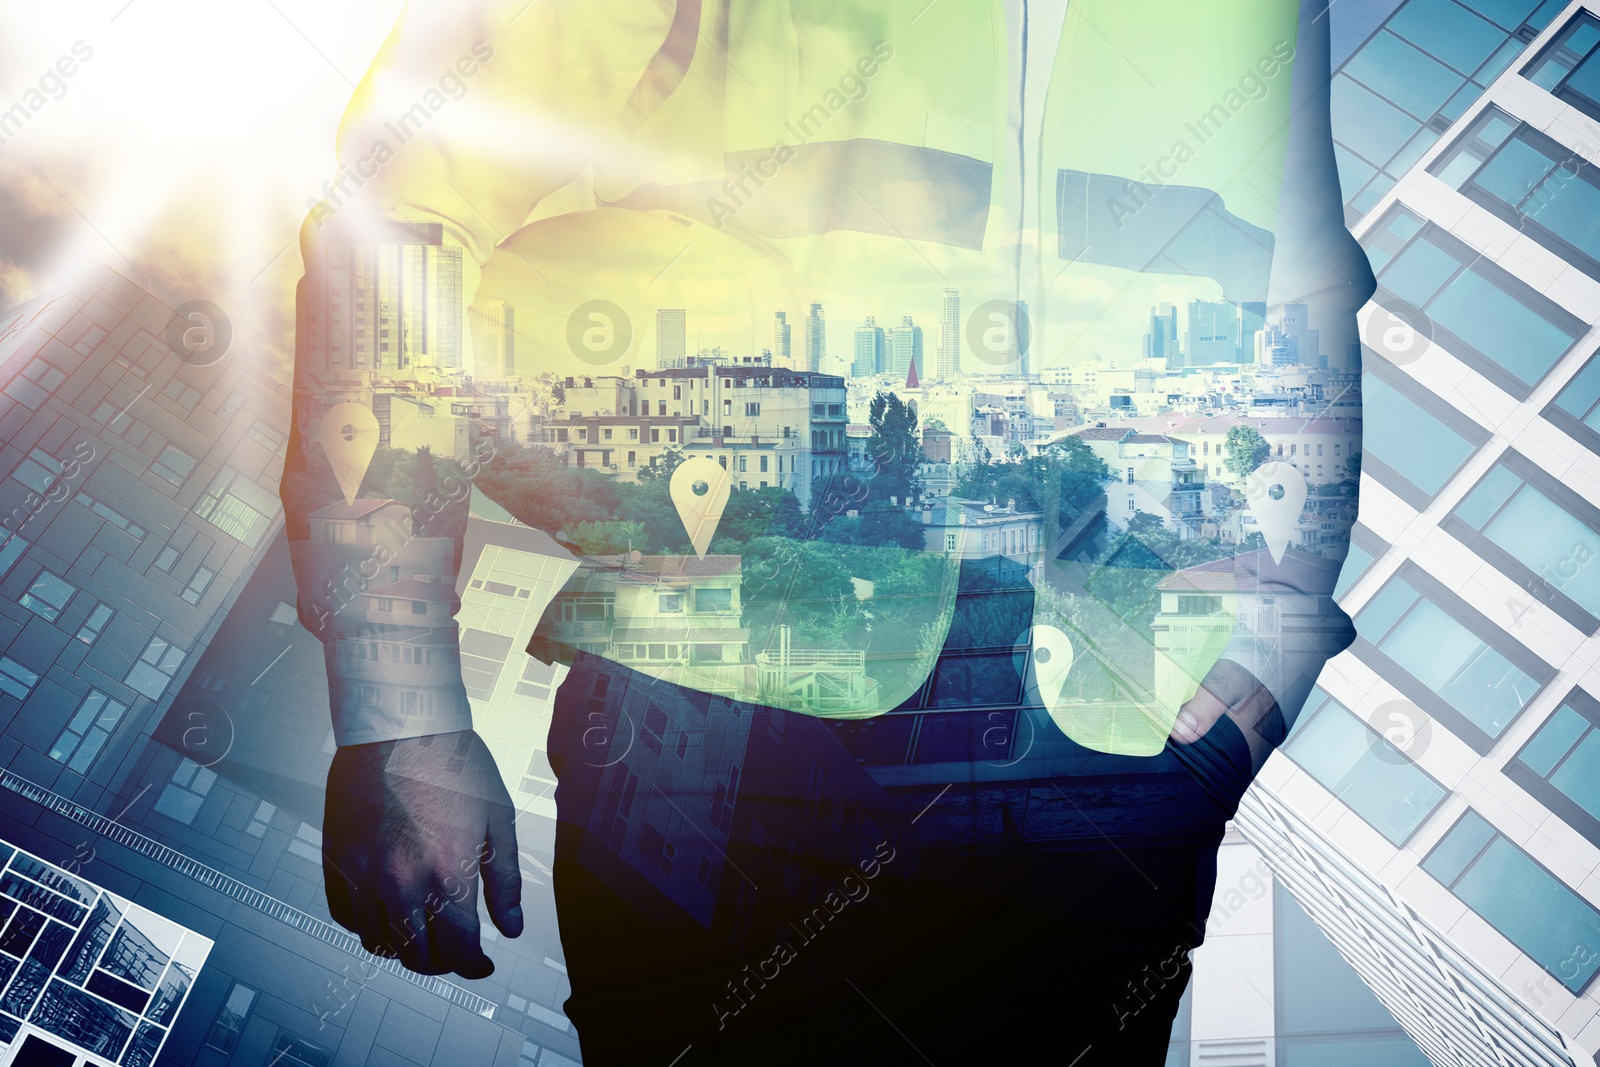 Image of Engineer with hard hat and cityscapes, multiple exposure